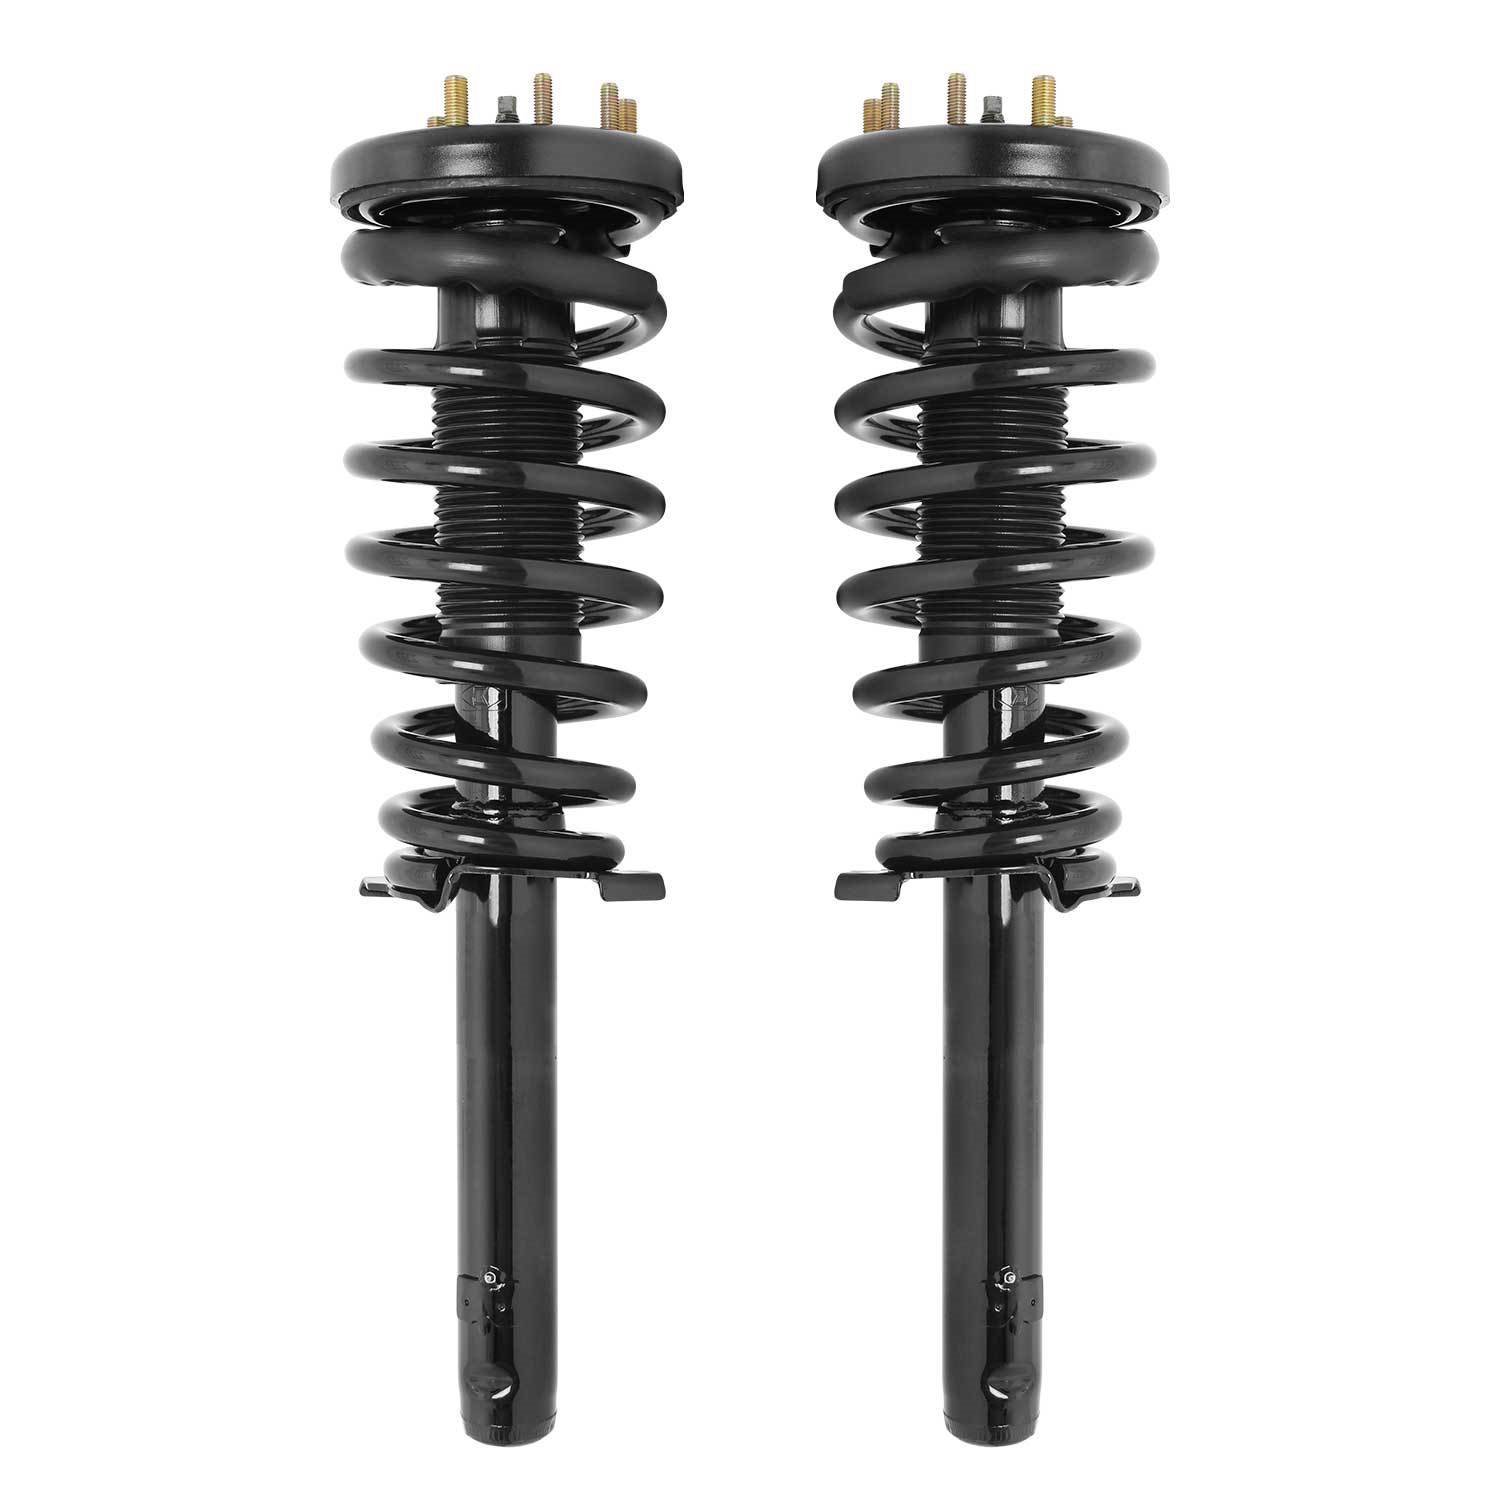 2-11951-11952-001 Suspension Strut & Coil Spring Assembly Set Fits Select Acura TL